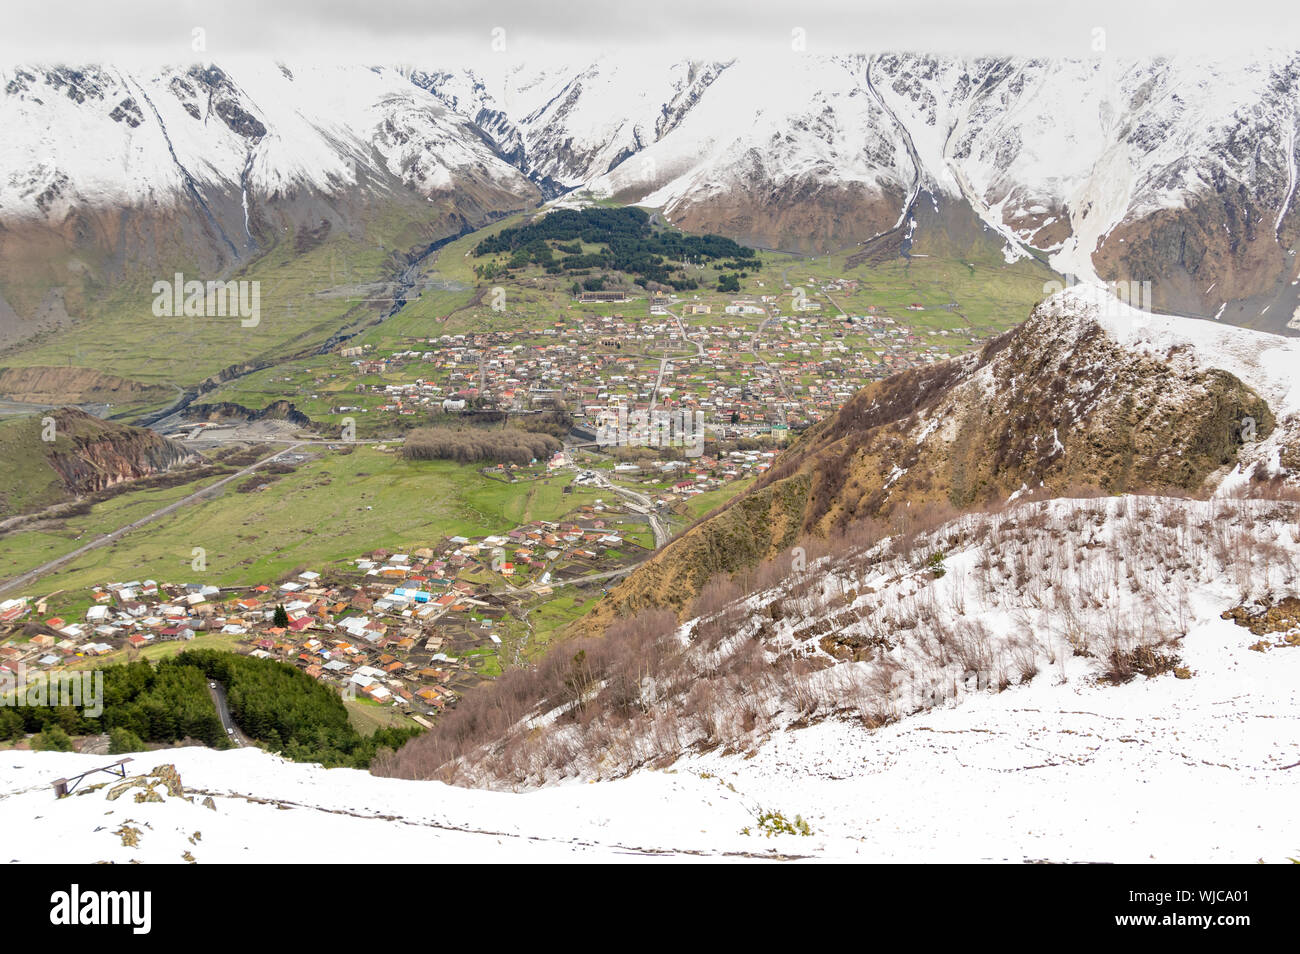 Overview of the town of Stepantsminda in the Greater Caucasus mountains just below the Mount Kazbek Stock Photo